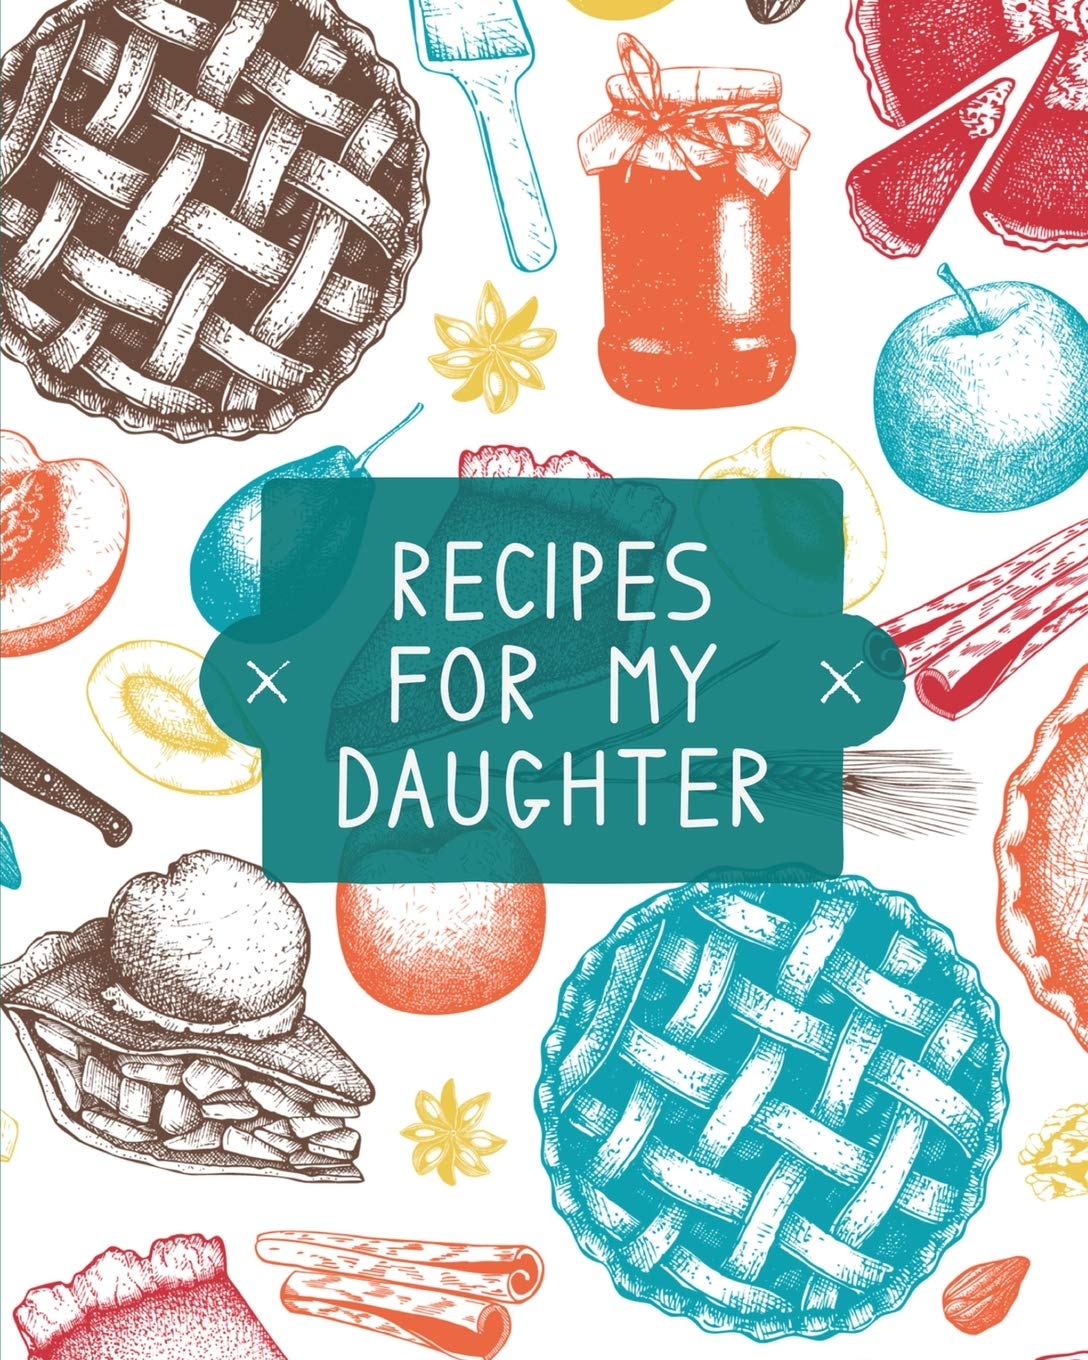 RECIPES FOR MY DAUGHTER